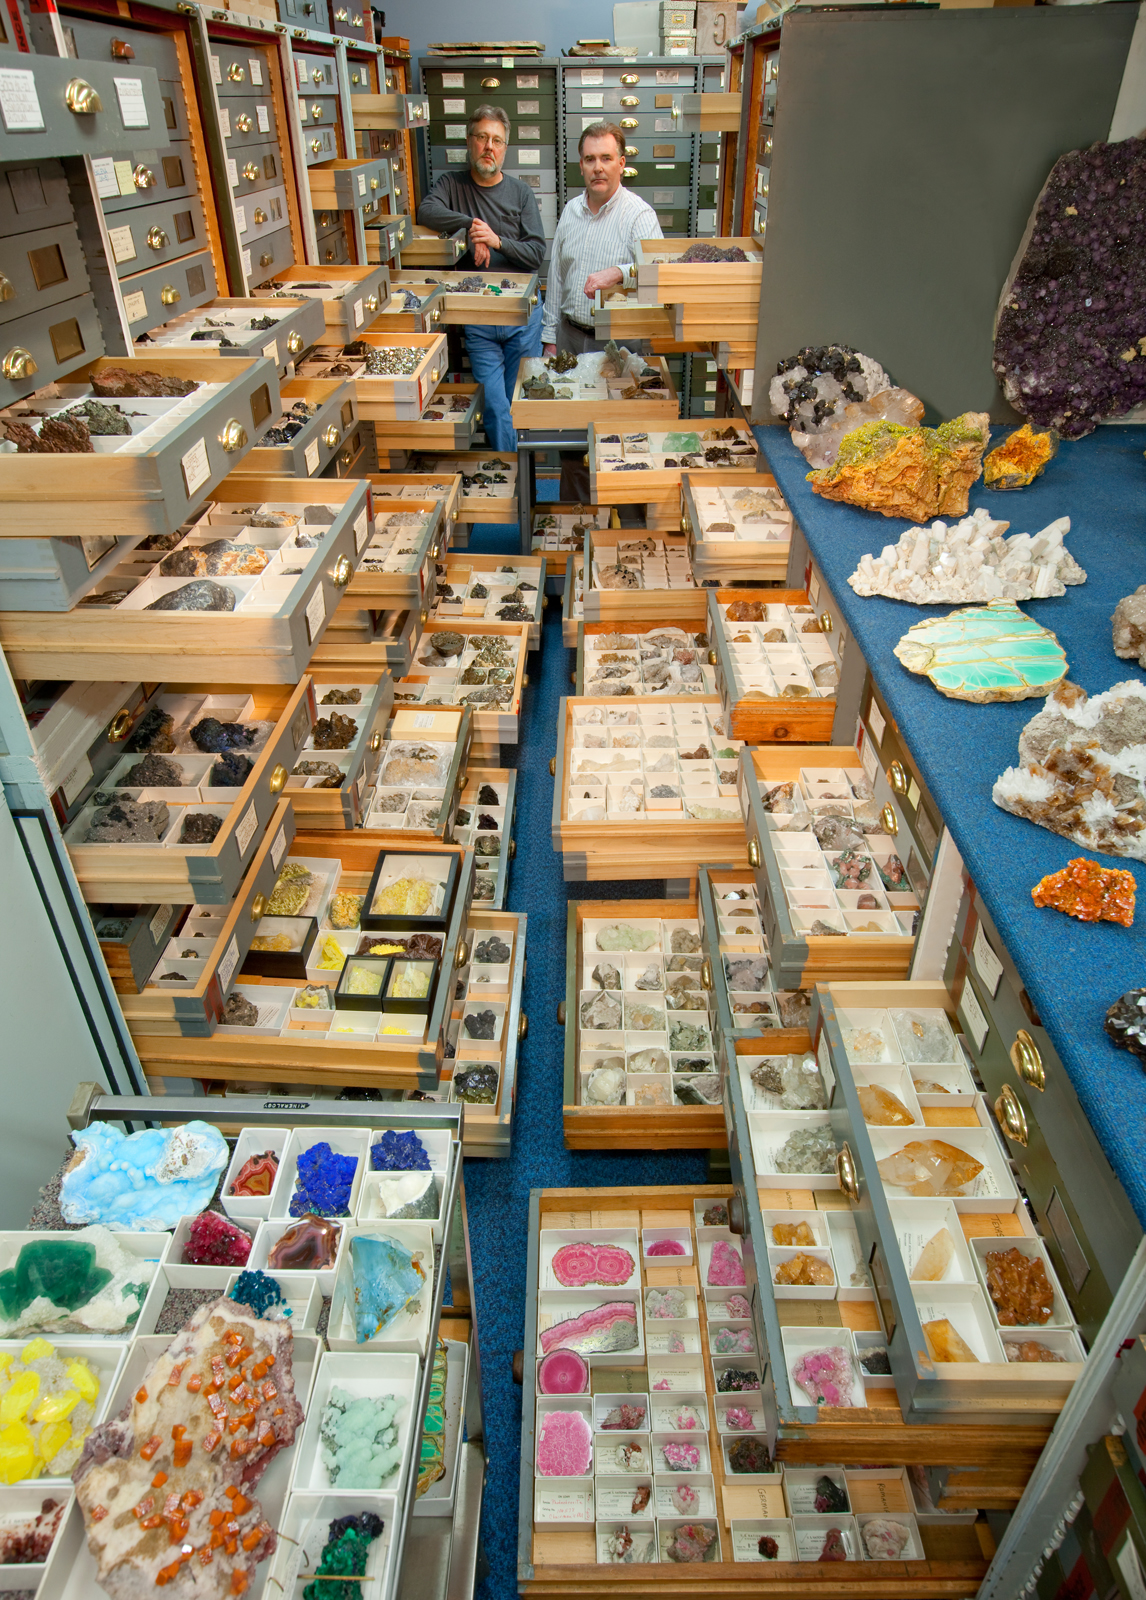 Mineral Sciences' collection